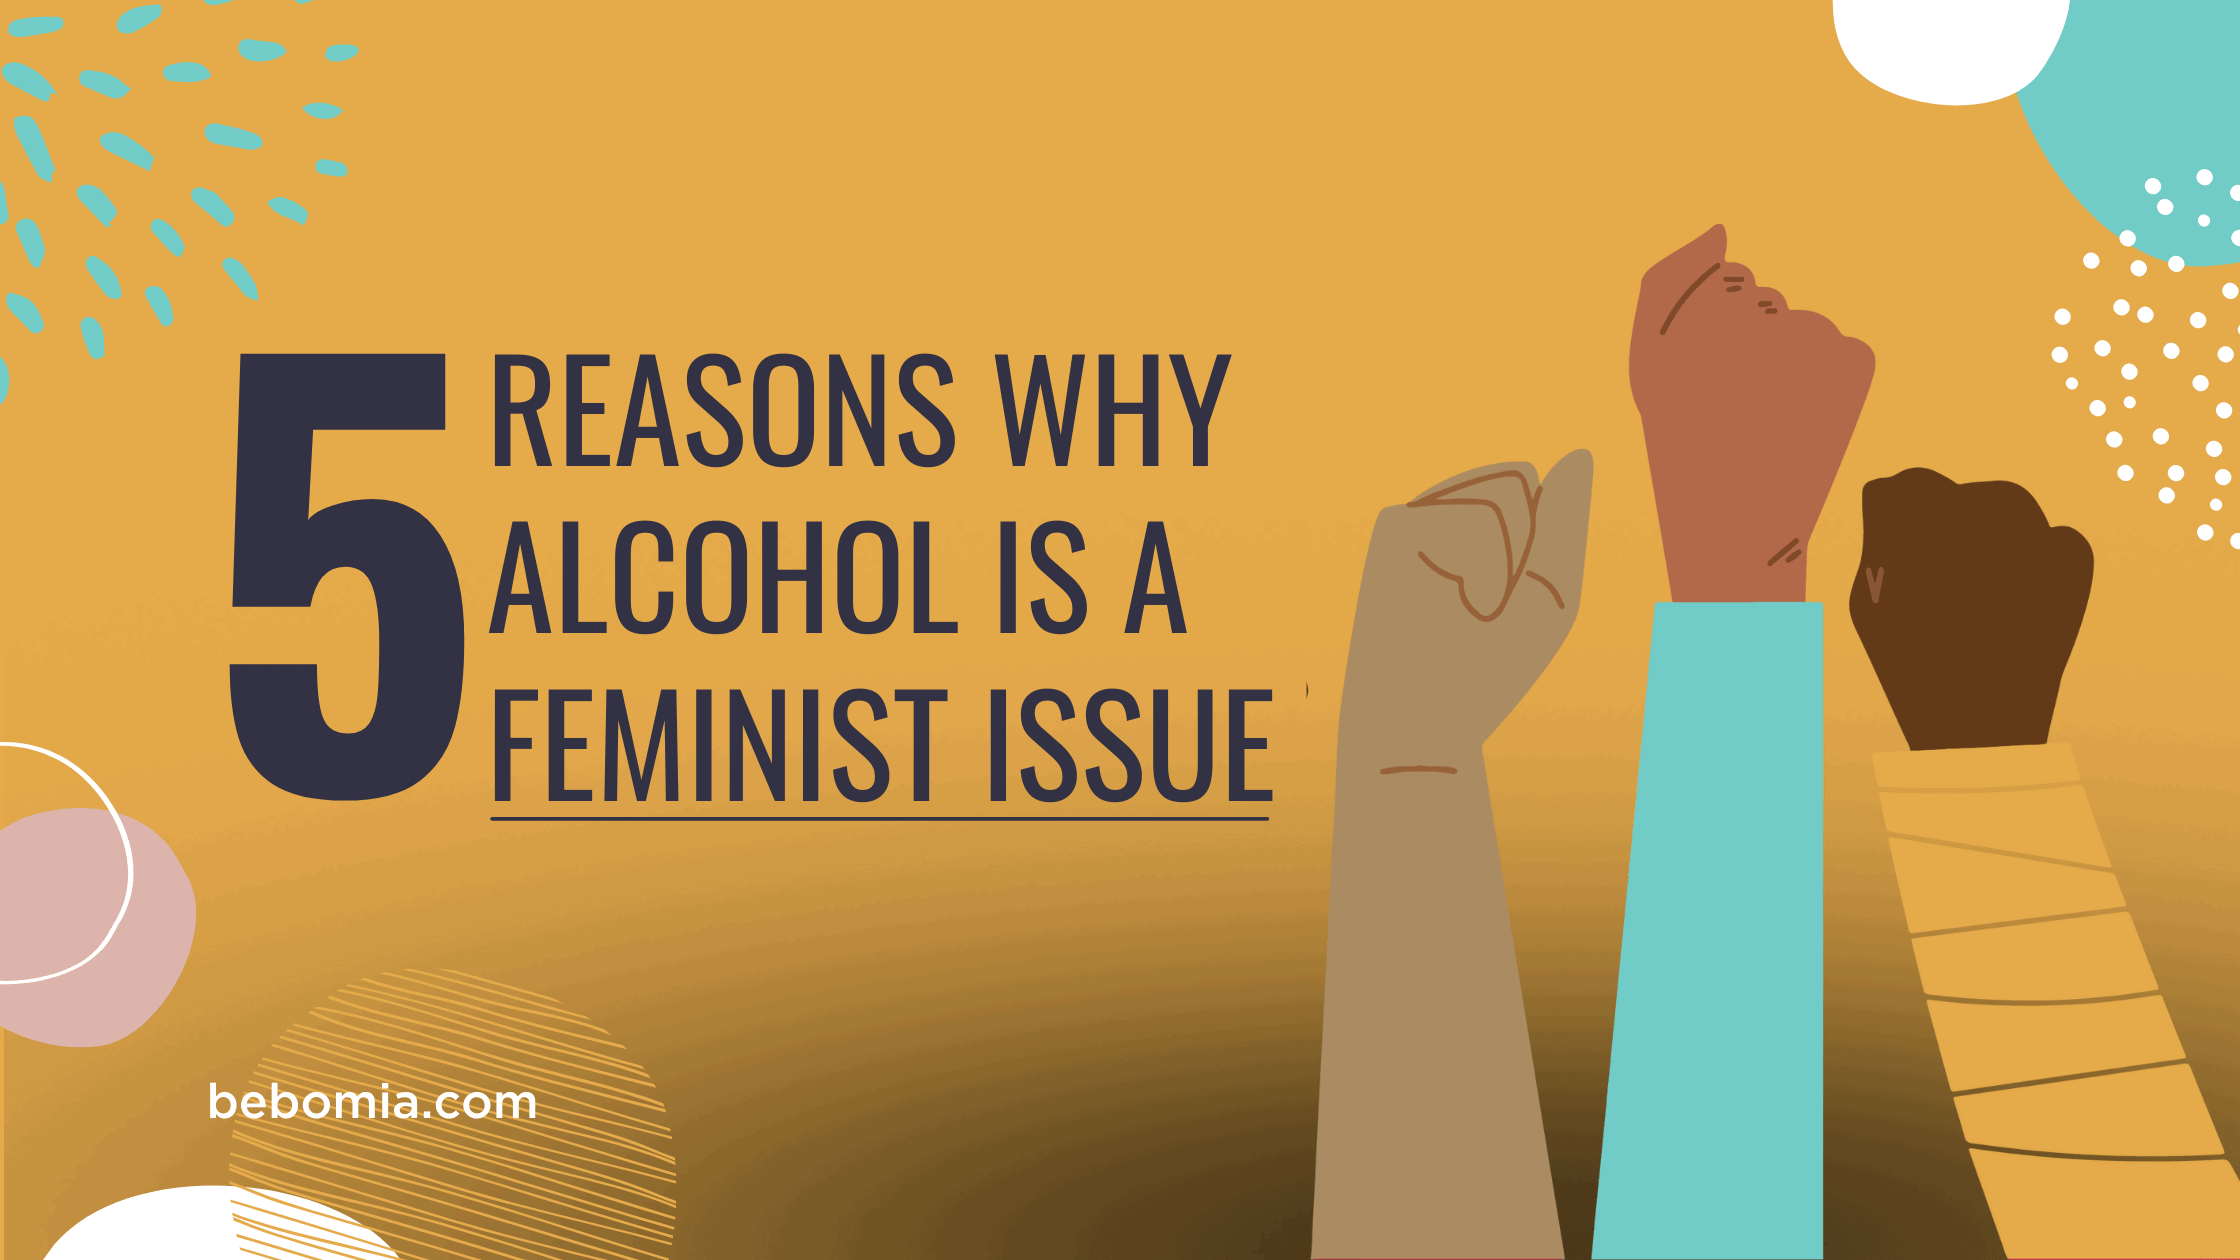 5 Reasons Why Alcohol Is a Feminist Issue